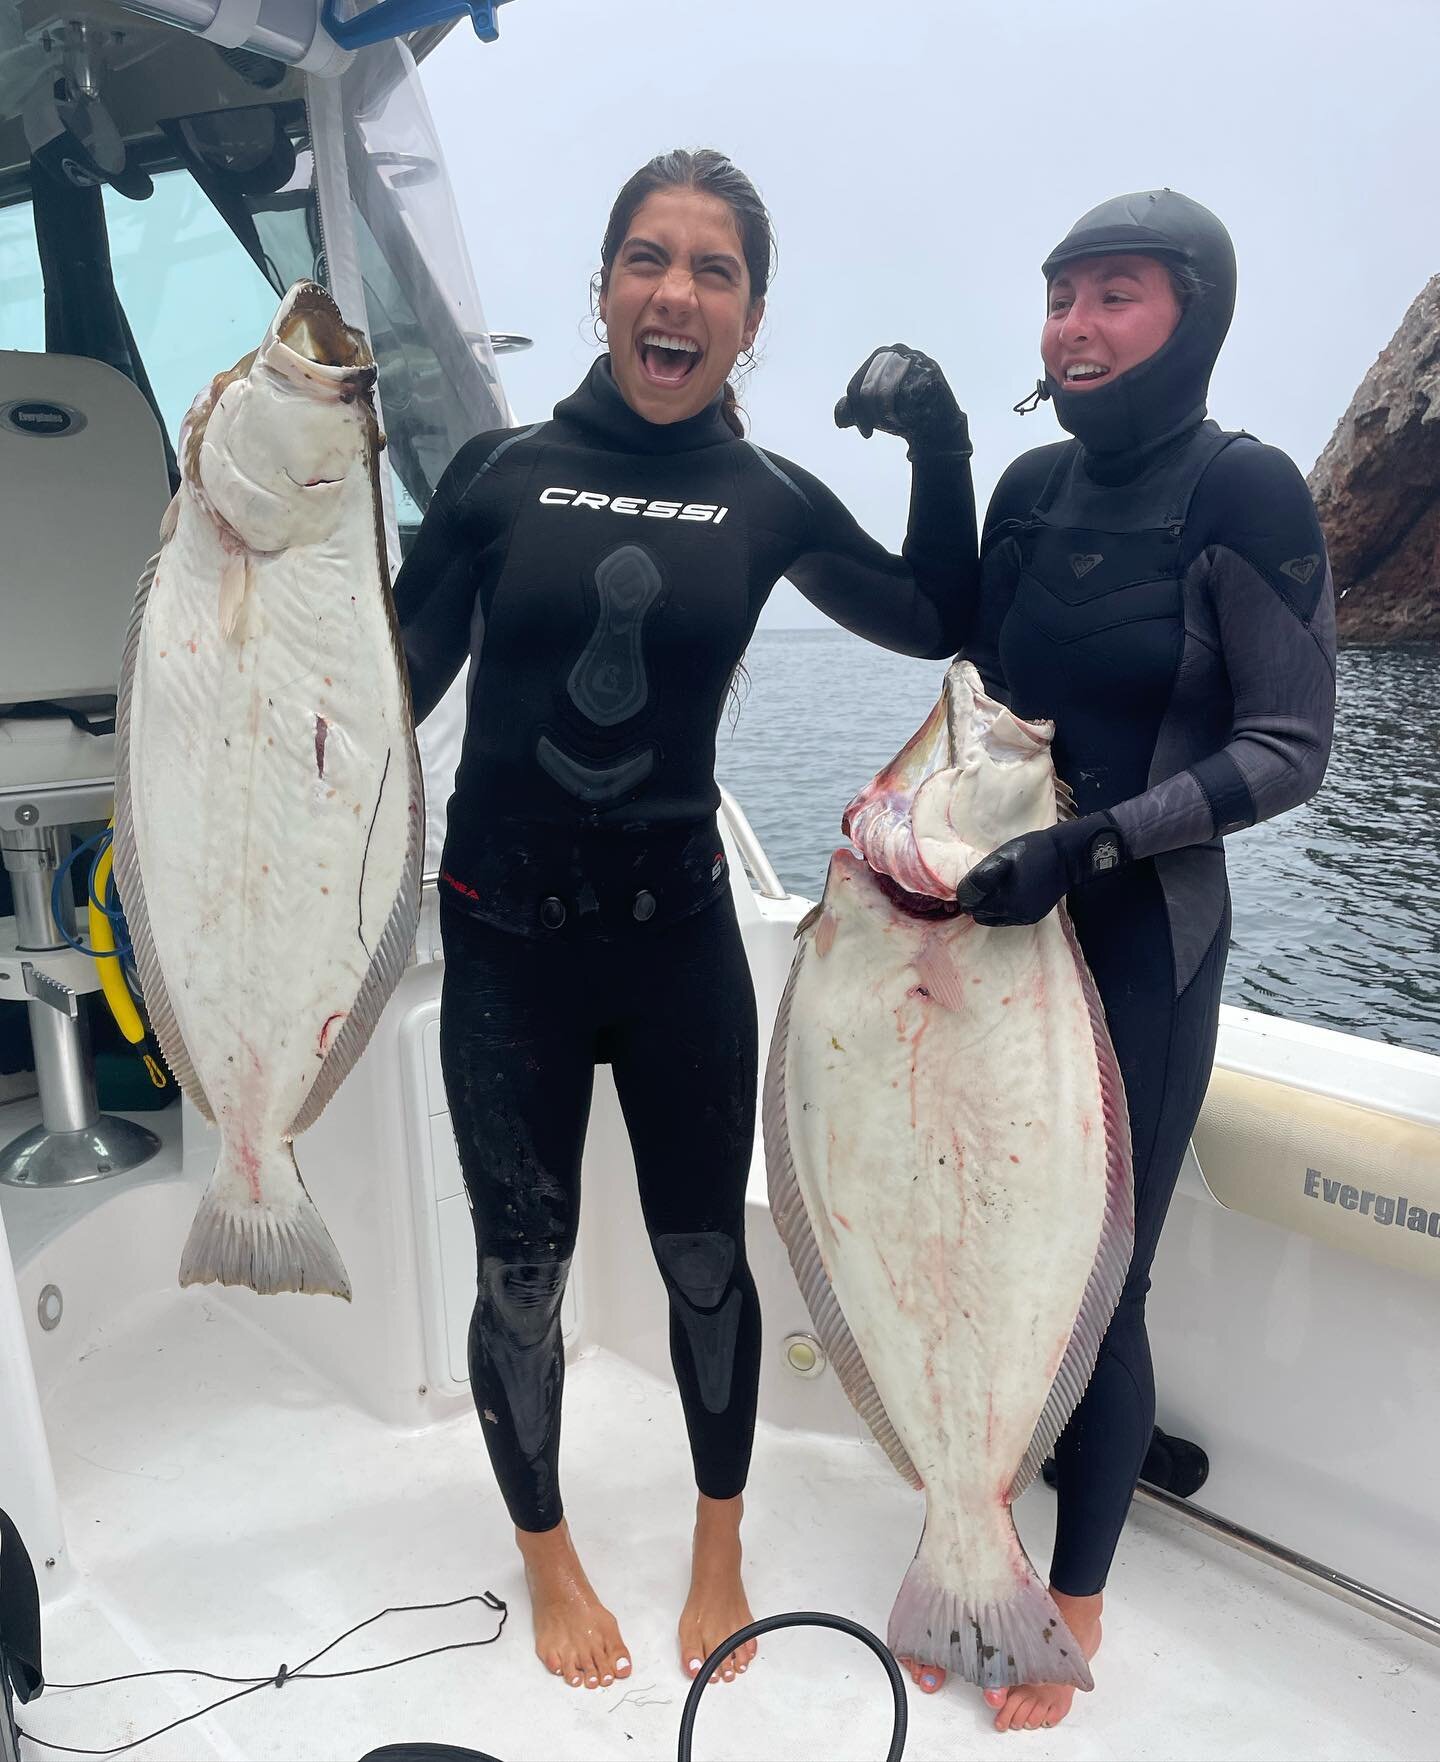 Sunday funday with Luana and Hazel aka the dynamic duel.  Fun times where had by all&hellip;special thanks to @sbspearo and @gillangib for making it happen!  Basically a perfect day at the Channel Islands